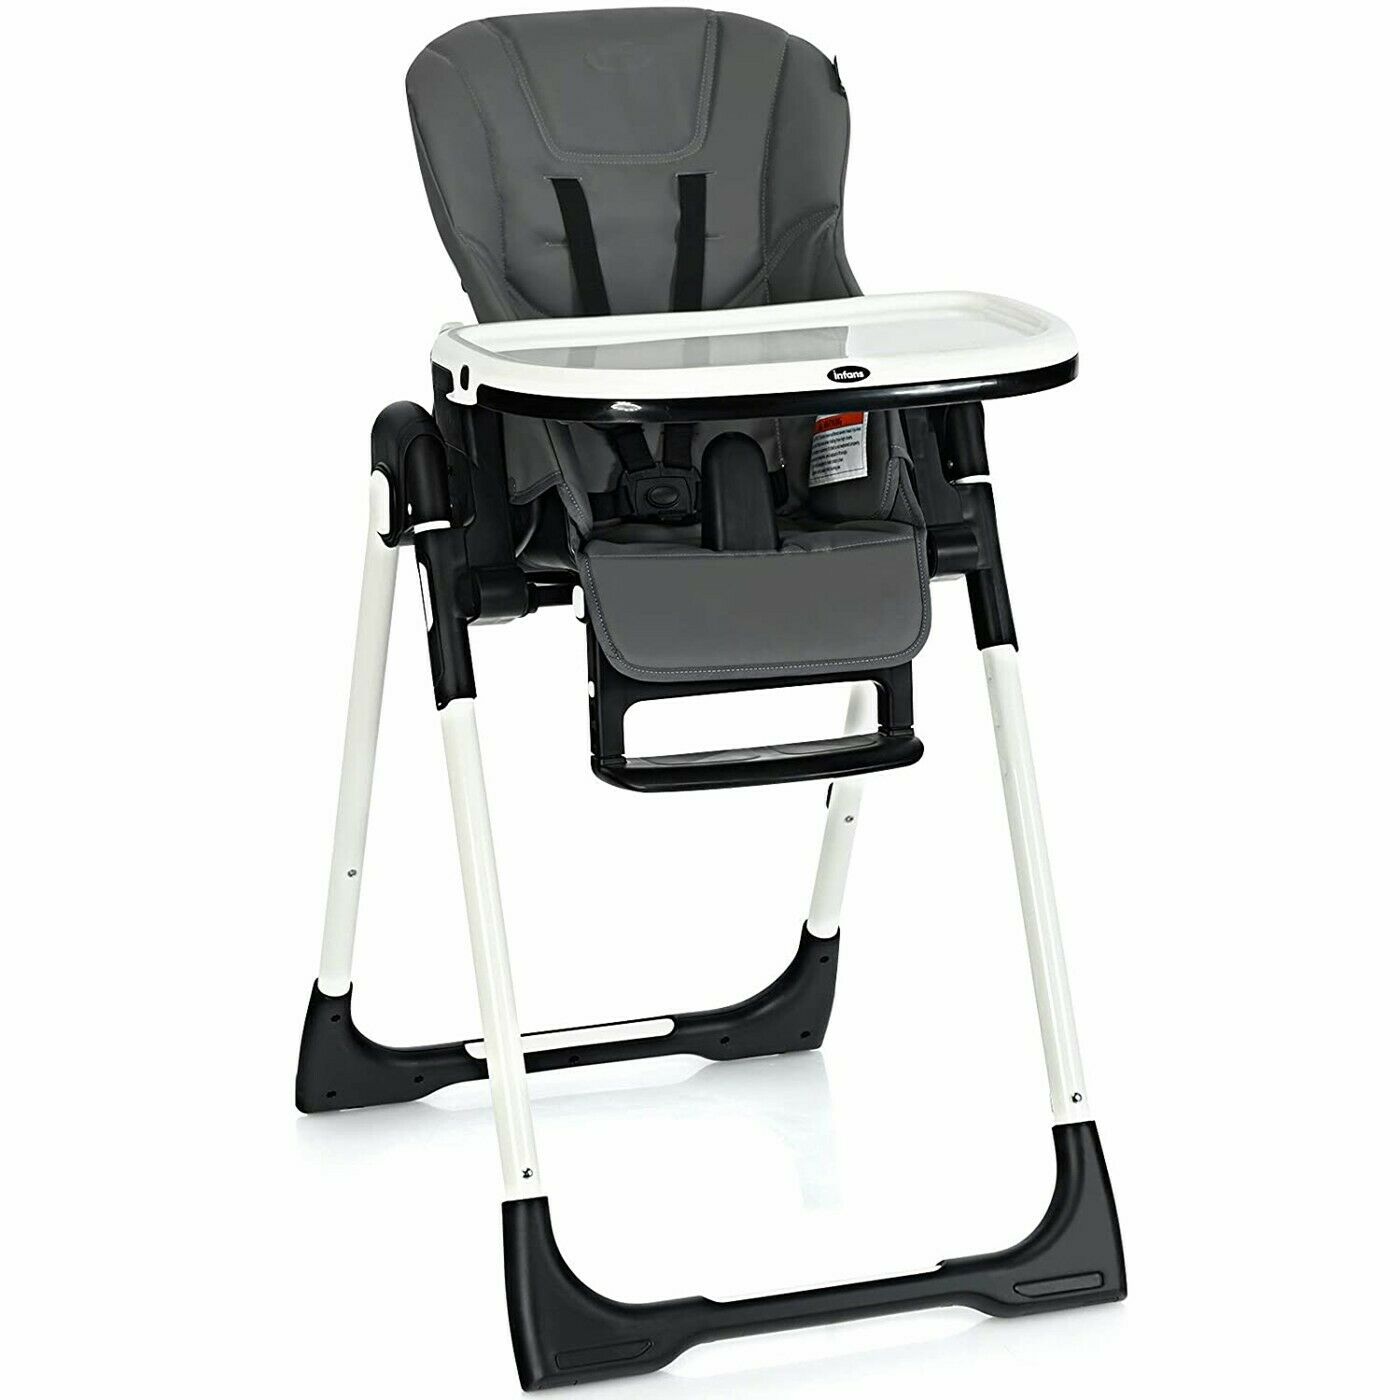 Graco Baby Jogger Stroller with Car Seat High Chair Playard Travel System Combo